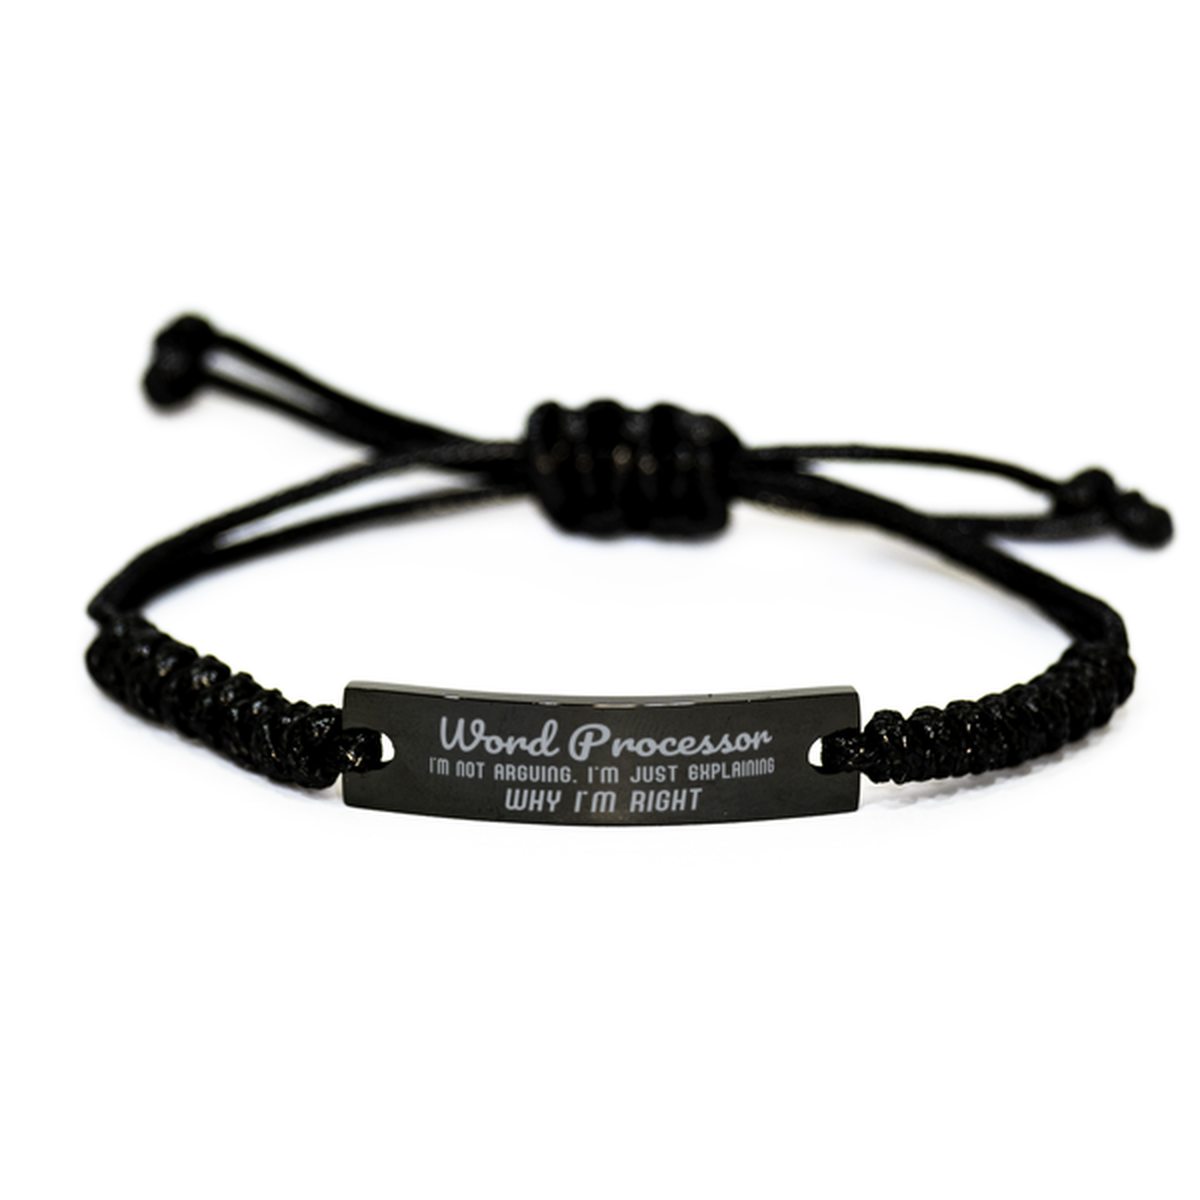 Word Processor I'm not Arguing. I'm Just Explaining Why I'm RIGHT Black Rope Bracelet, Funny Saying Quote Word Processor Gifts For Word Processor Graduation Birthday Christmas Gifts for Men Women Coworker